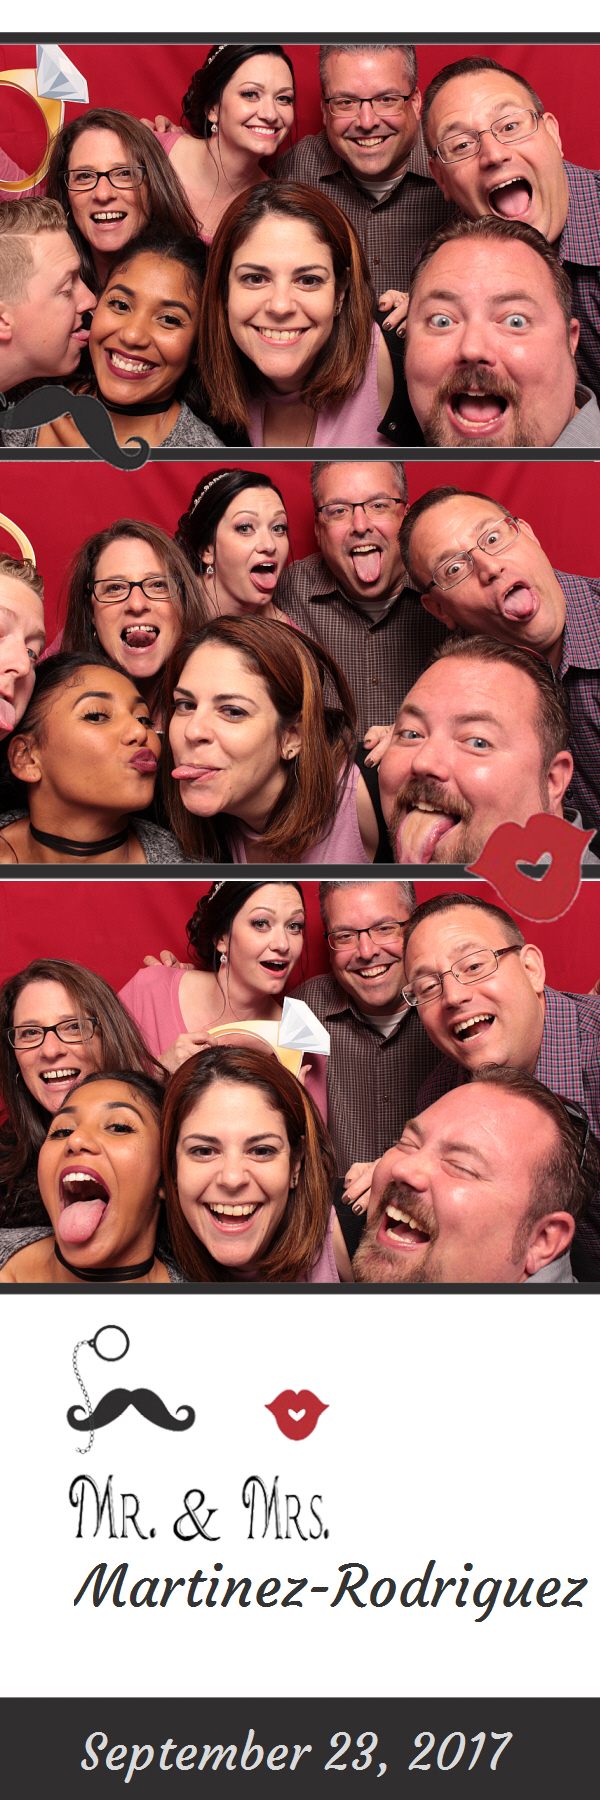 Photo strip of group posing in front of red backdrop